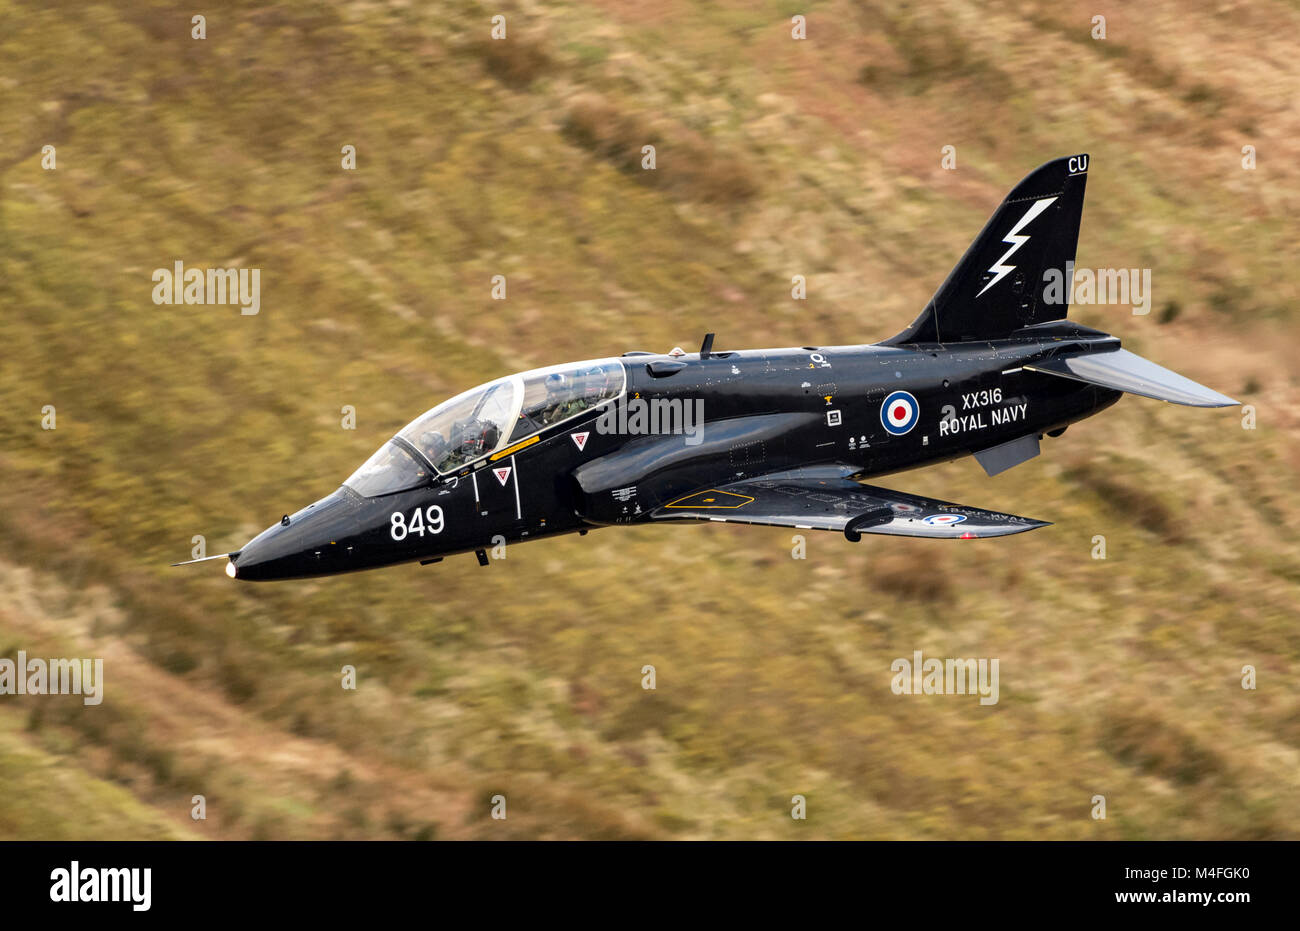 Royal Navy Livery Hawk from RAF Leeming low level flying in the Mach Loop Stock Photo